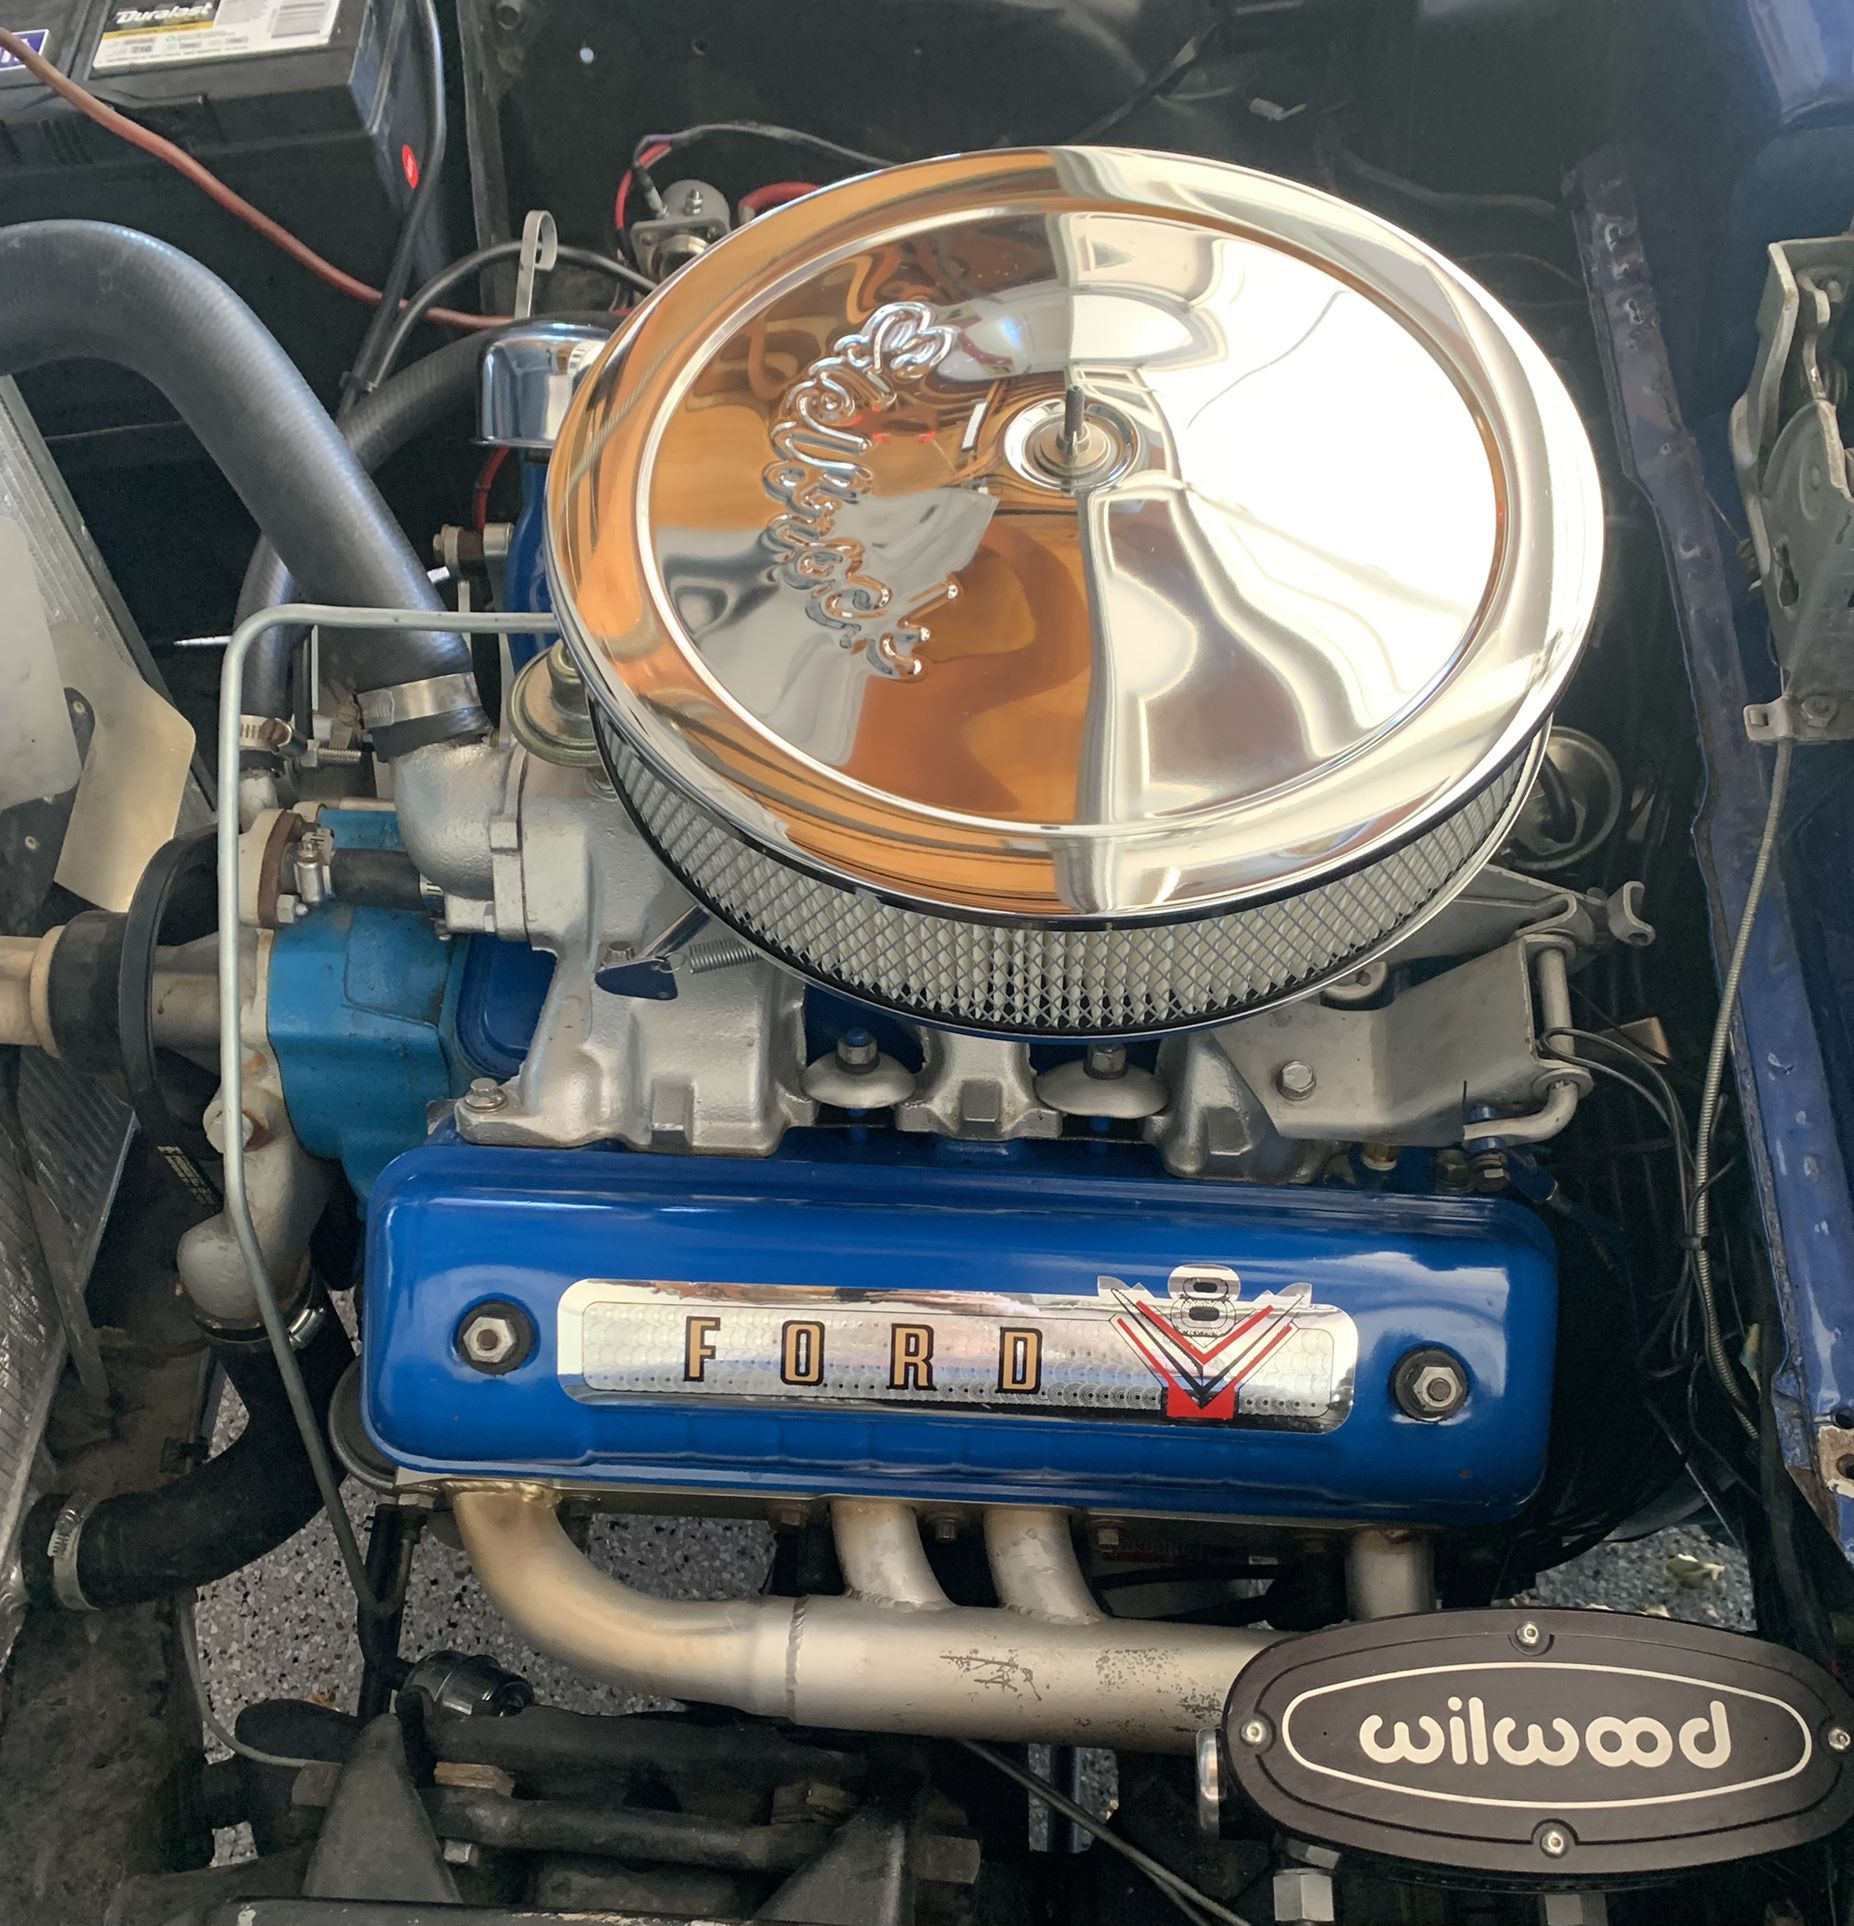 Ford Y Block 292 Complete Engine For Sale In Los Angeles Ca Offerup